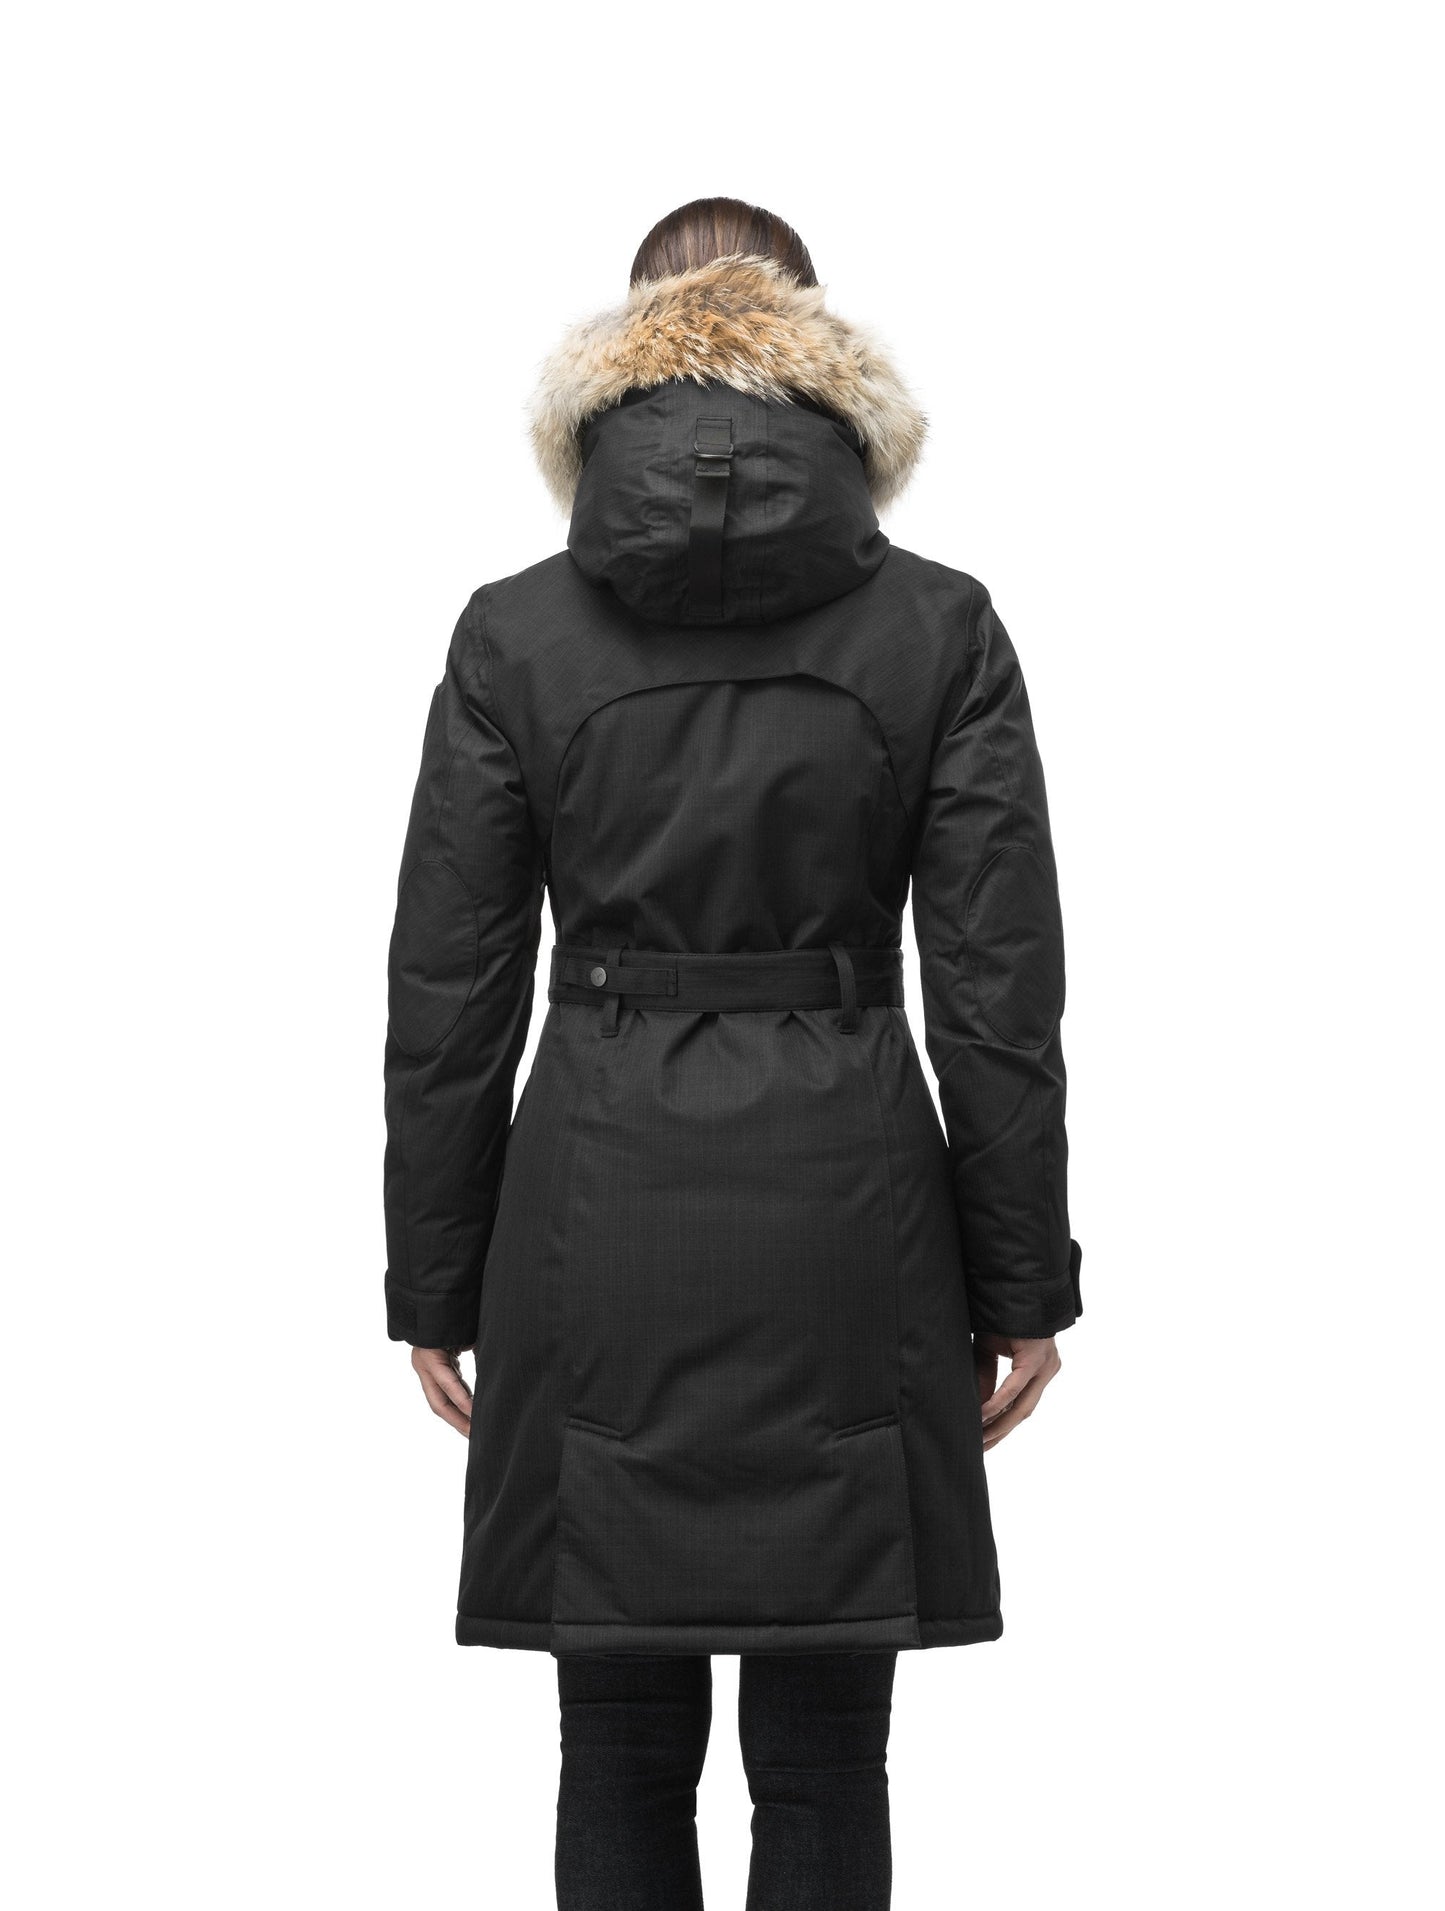 Women's down filled double breasted peacoat with a belted waist in CH Black